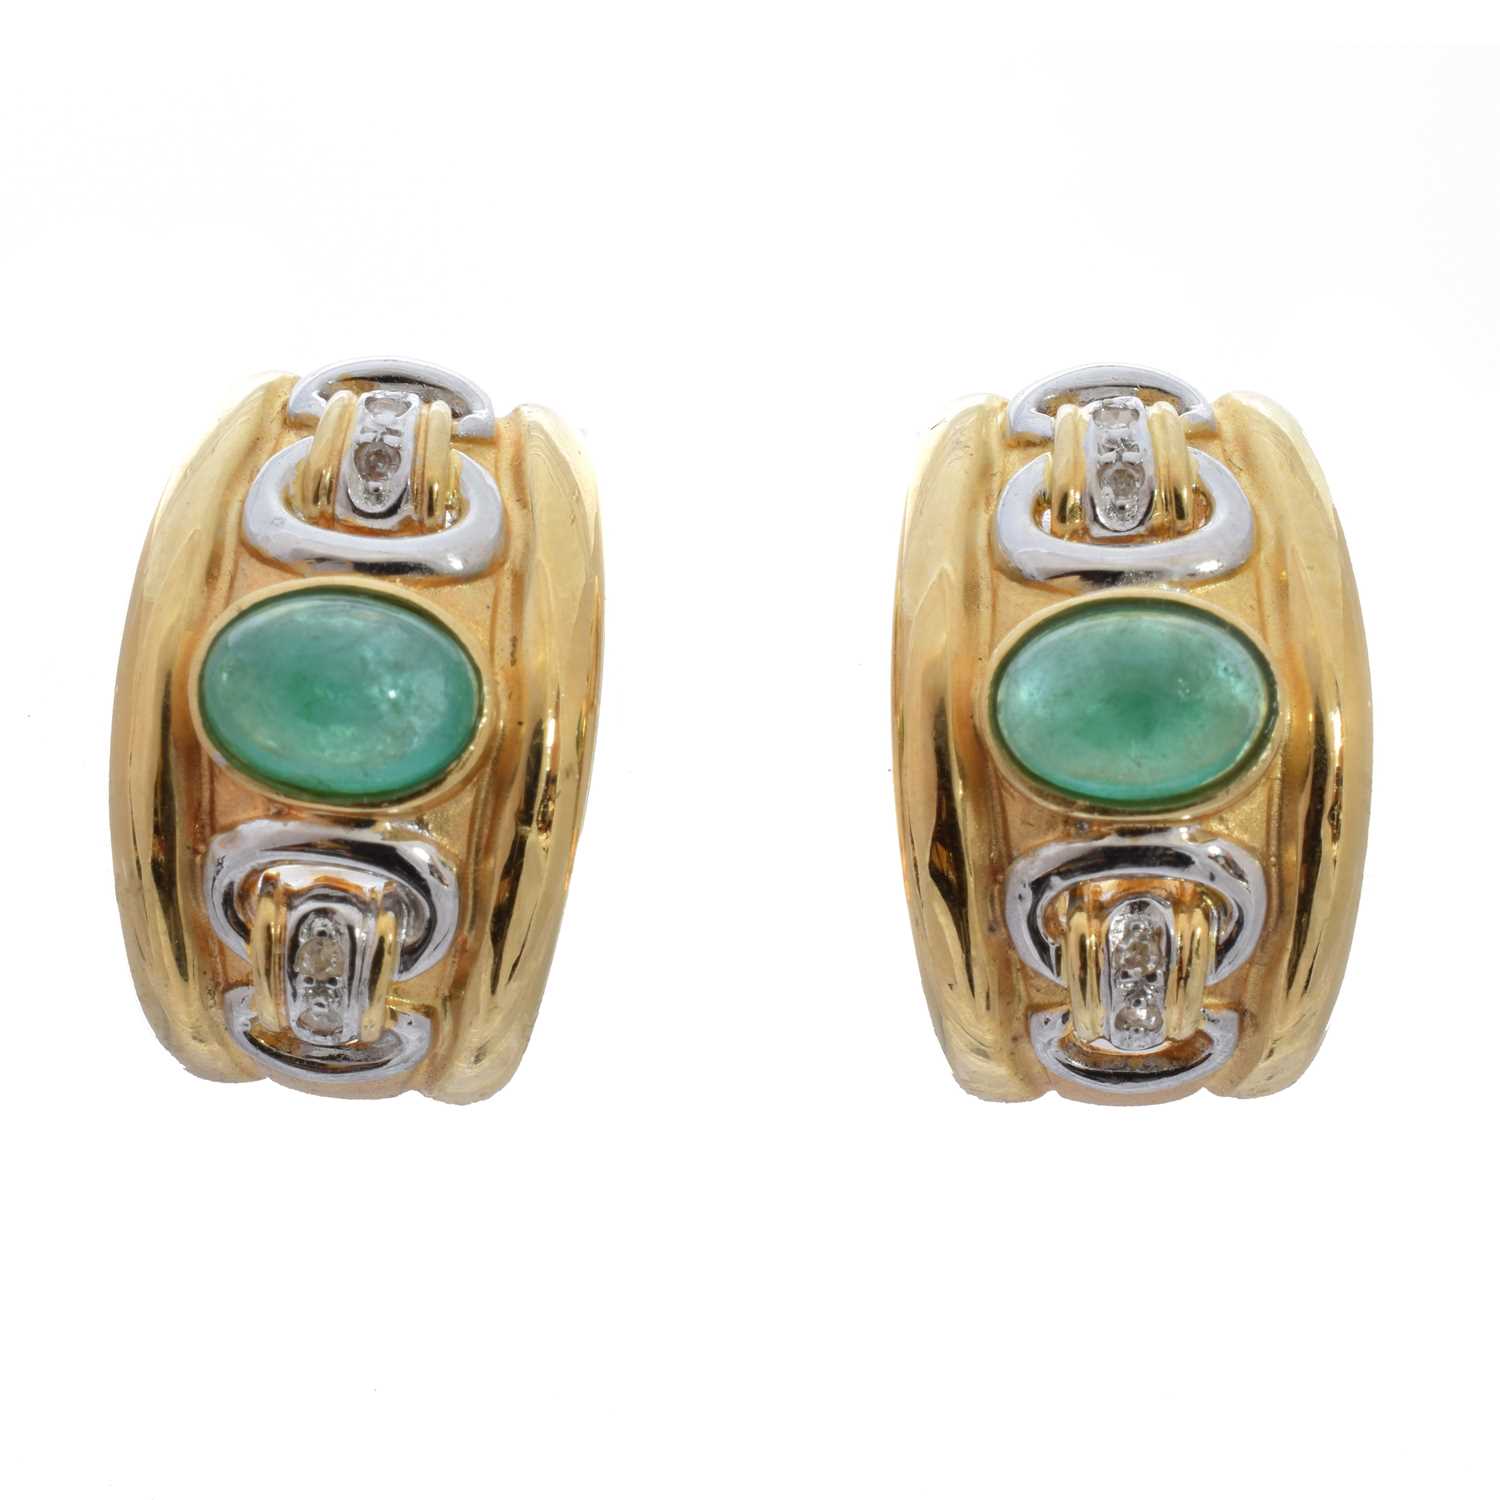 Lot 46 - A pair of emerald and diamond earrings